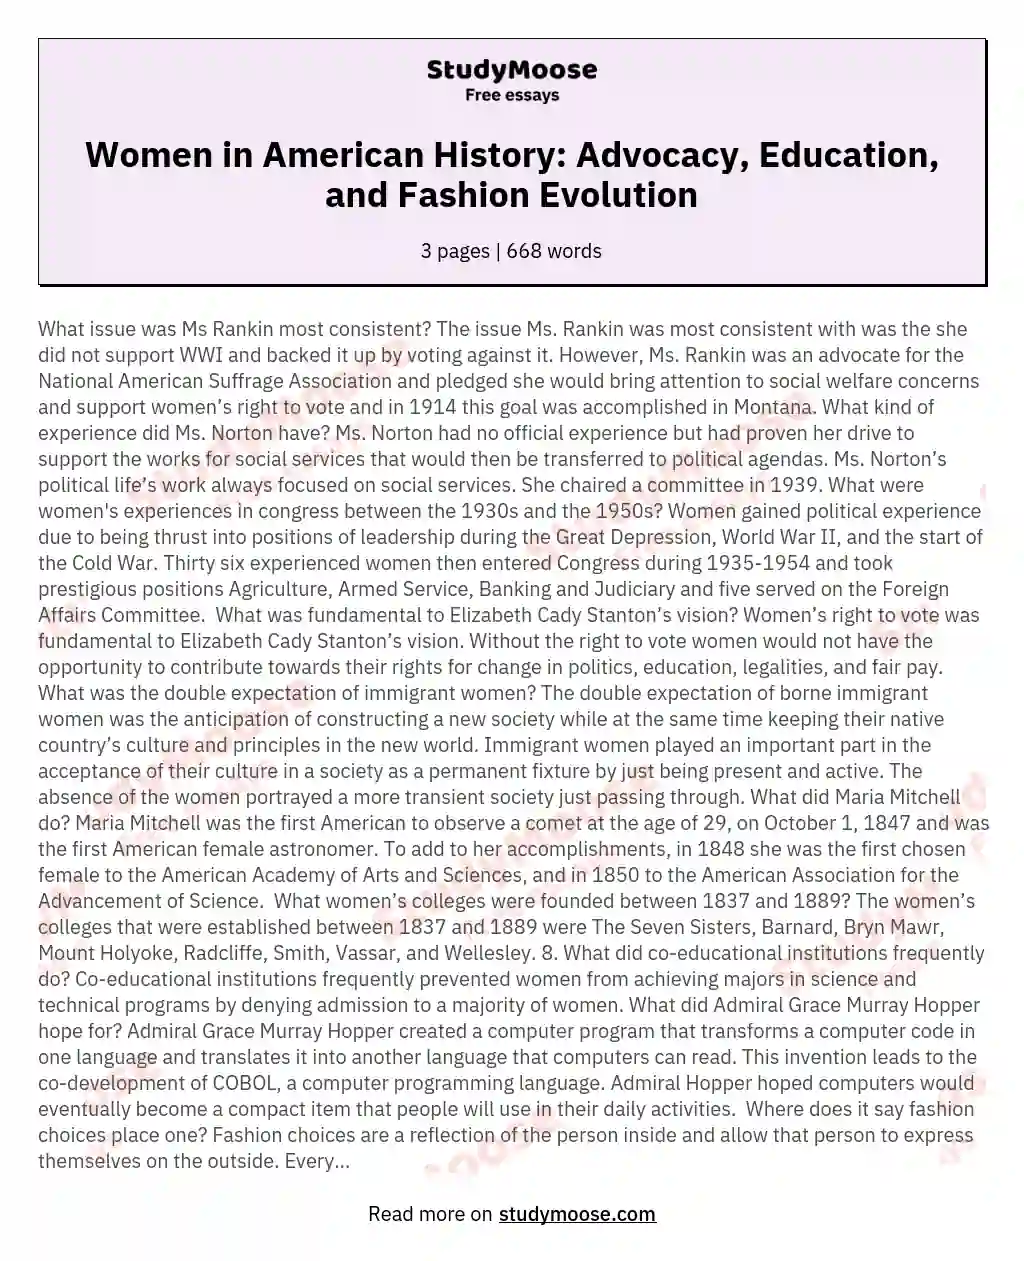 Women in American History: Advocacy, Education, and Fashion Evolution essay